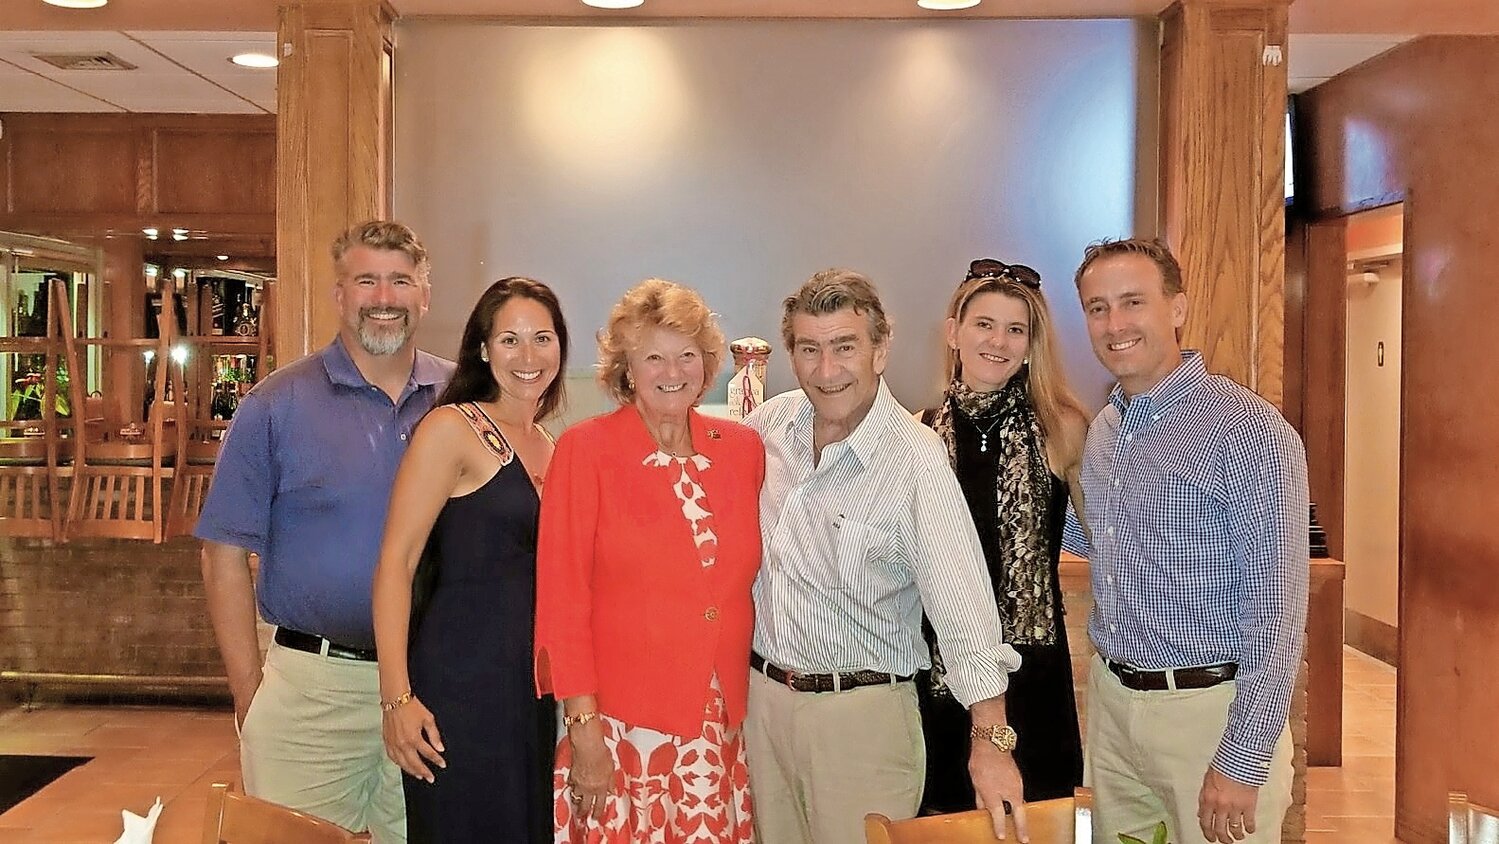 The Bahnik family —which helped found Mill-Max Manufacturing Co., in Oyster Bay, were honored by the Oyster Bay/East Norwich Chamber of Commerce, as well as the Nassau Council of Chambers of Commerce for their work in not only bringing industry to Long Island, but for their philanthropic works as well.